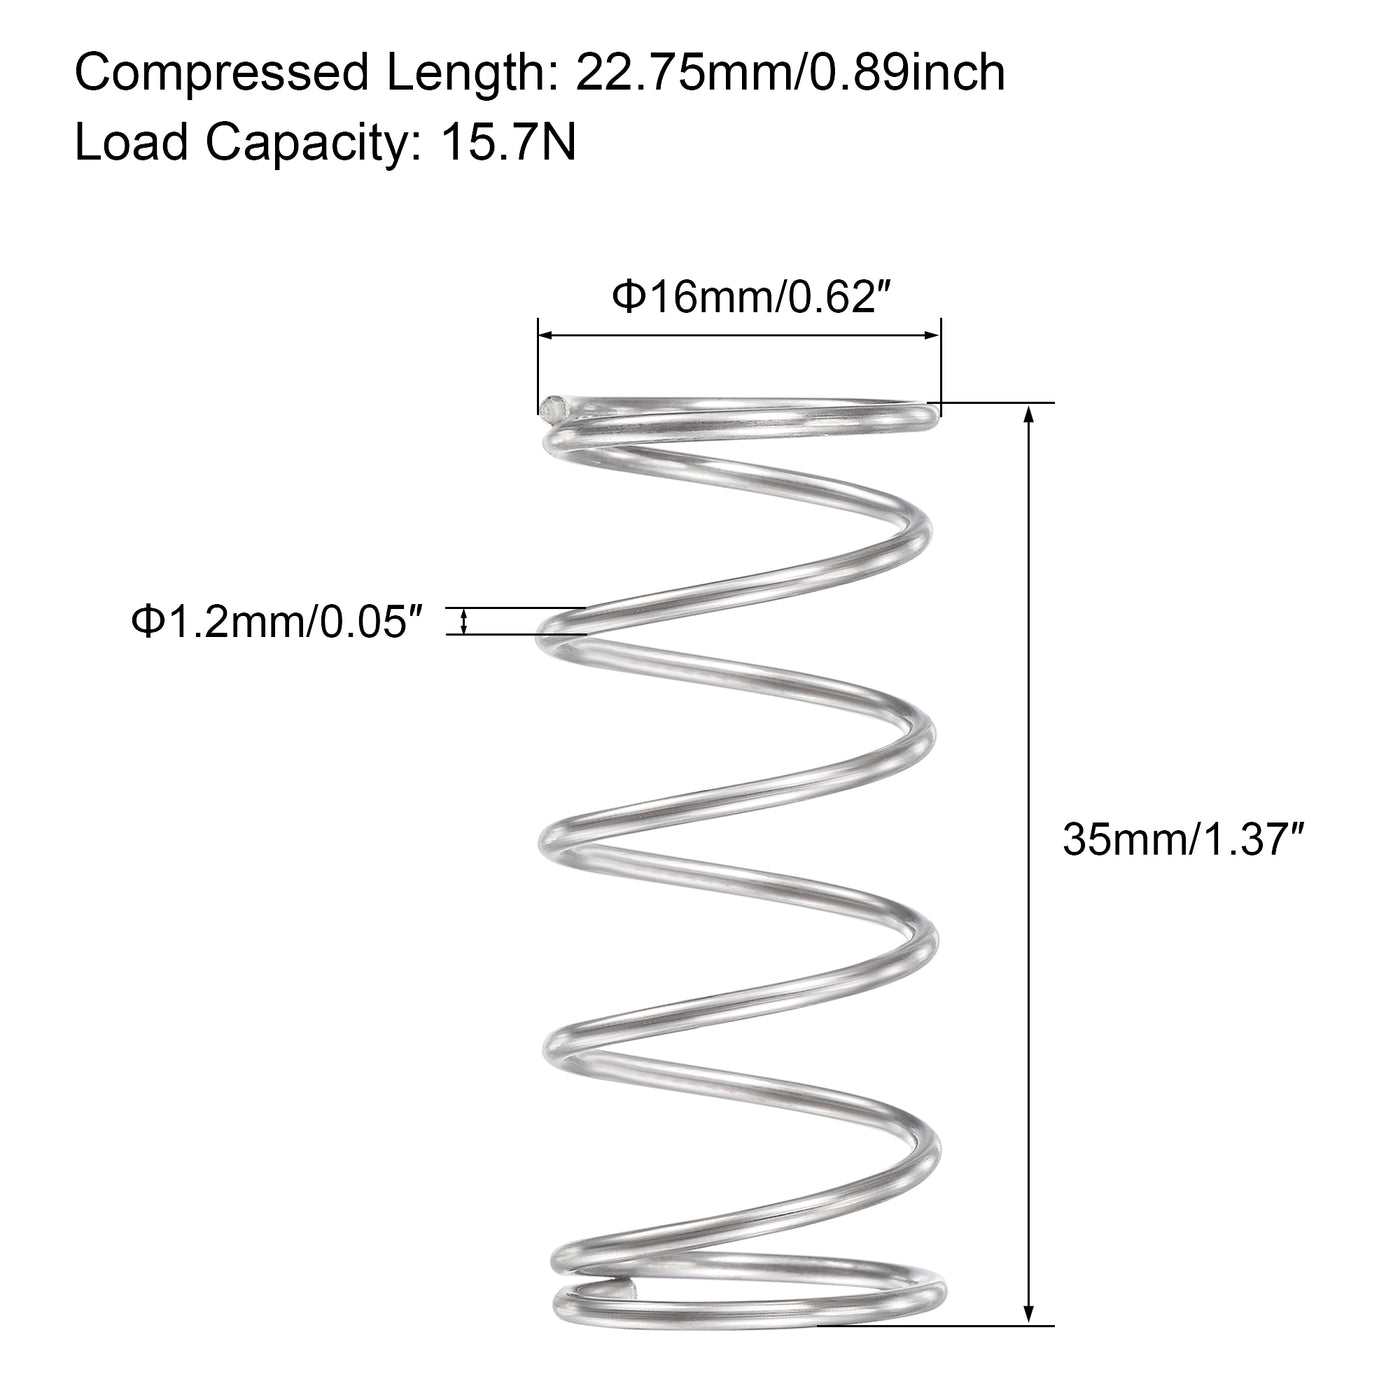 uxcell Uxcell 16mmx1.2mmx35mm 304 Stainless Steel Compression Spring 15.7N Load Capacity 5pcs